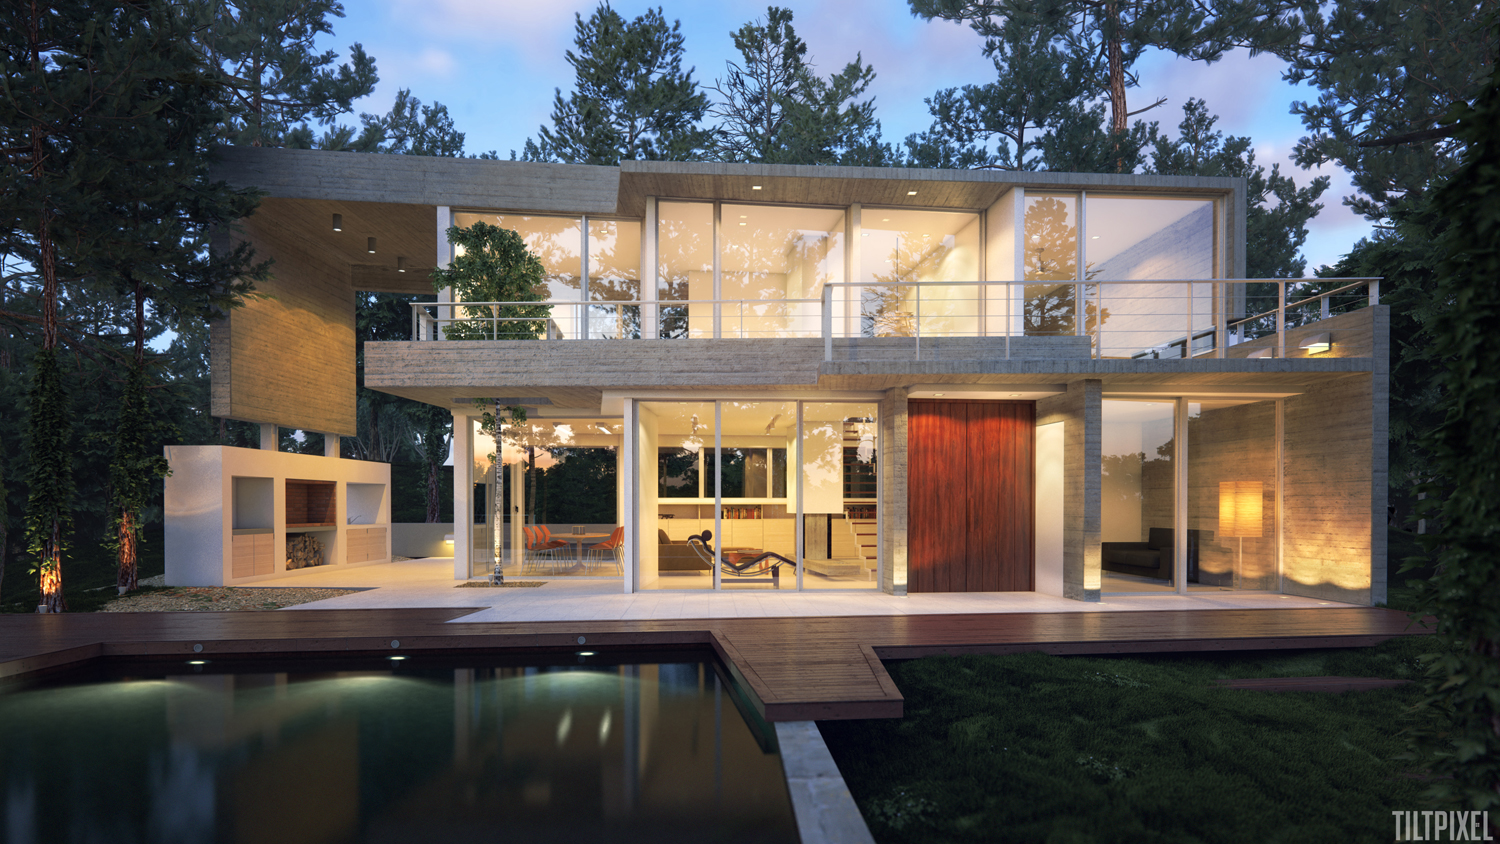 vray for sketchup pro 2014 free download full version